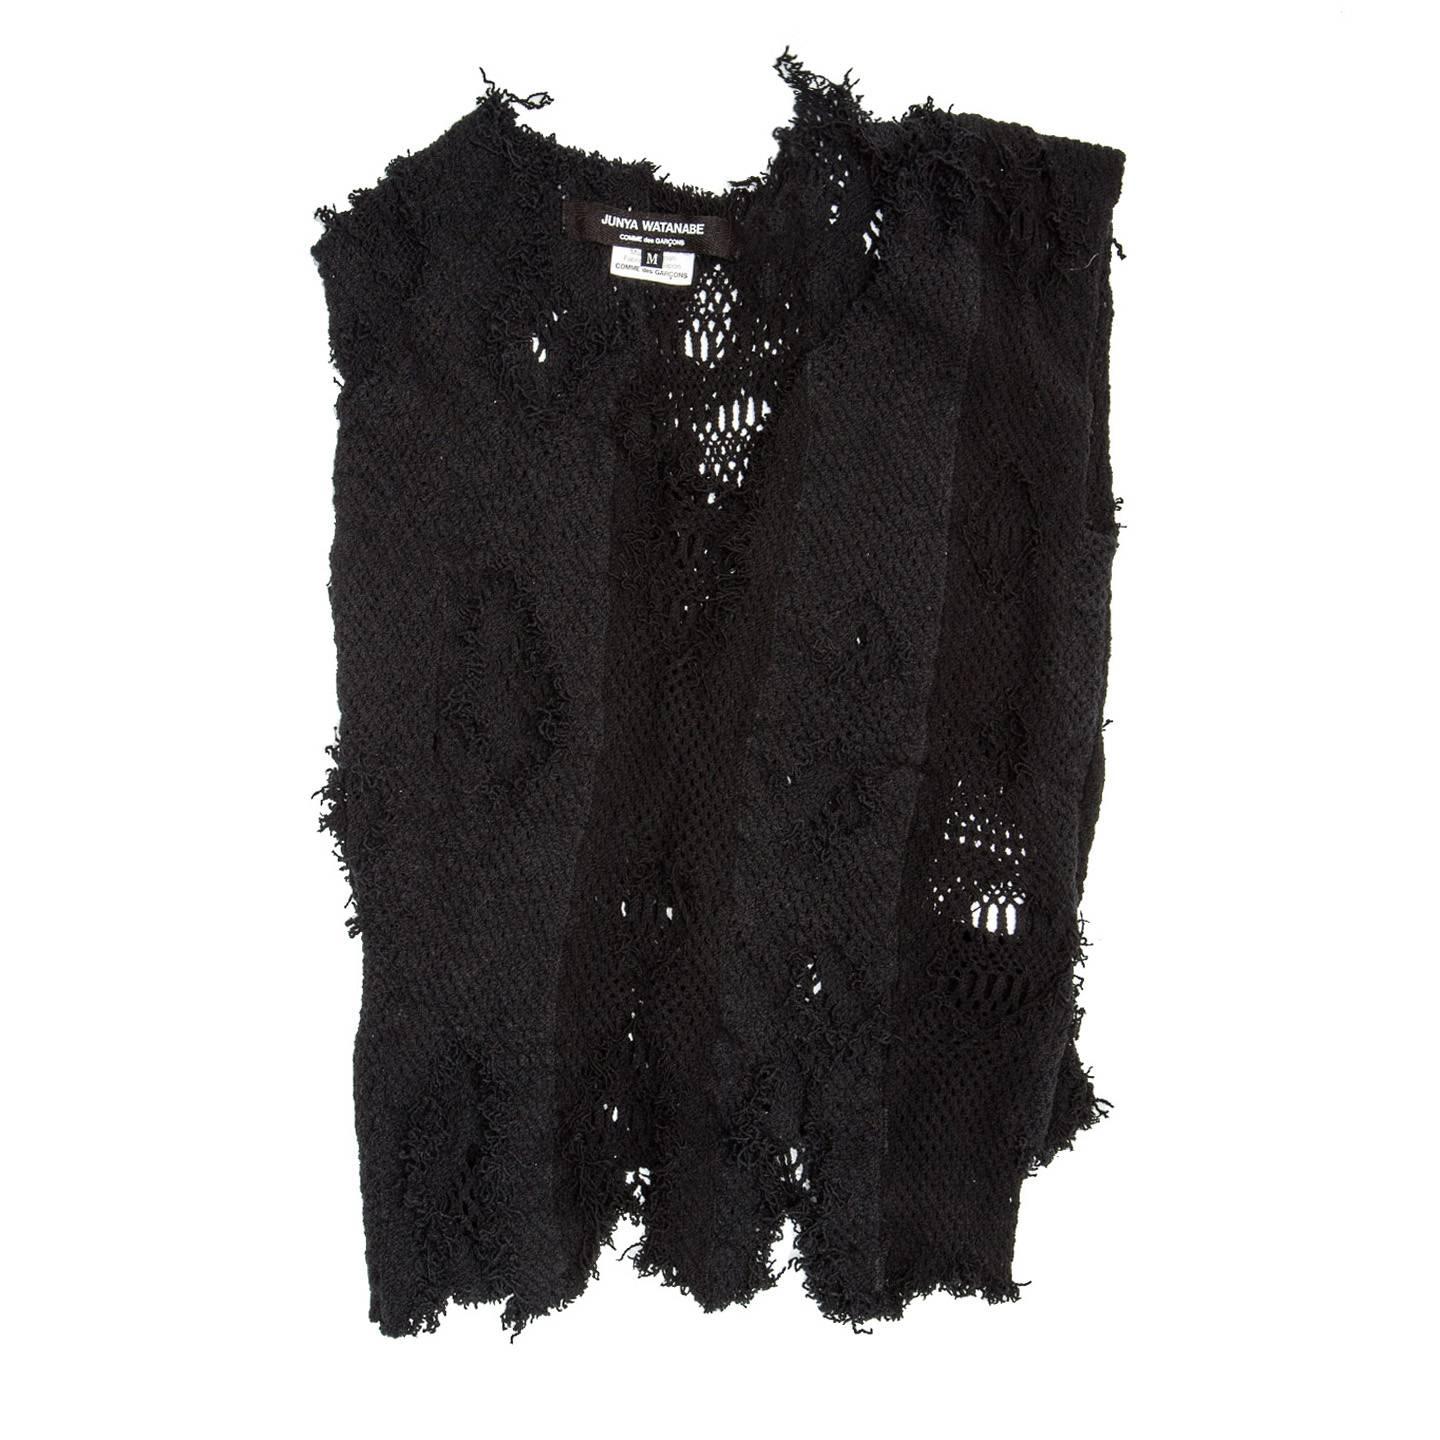 Loosely woven stretchy black cotton V-neck vest. Two layers of knit are assembled together creating a very interesting shredded looking texture.

Size  M Universal sizing

Condition  Excellent: never worn

 